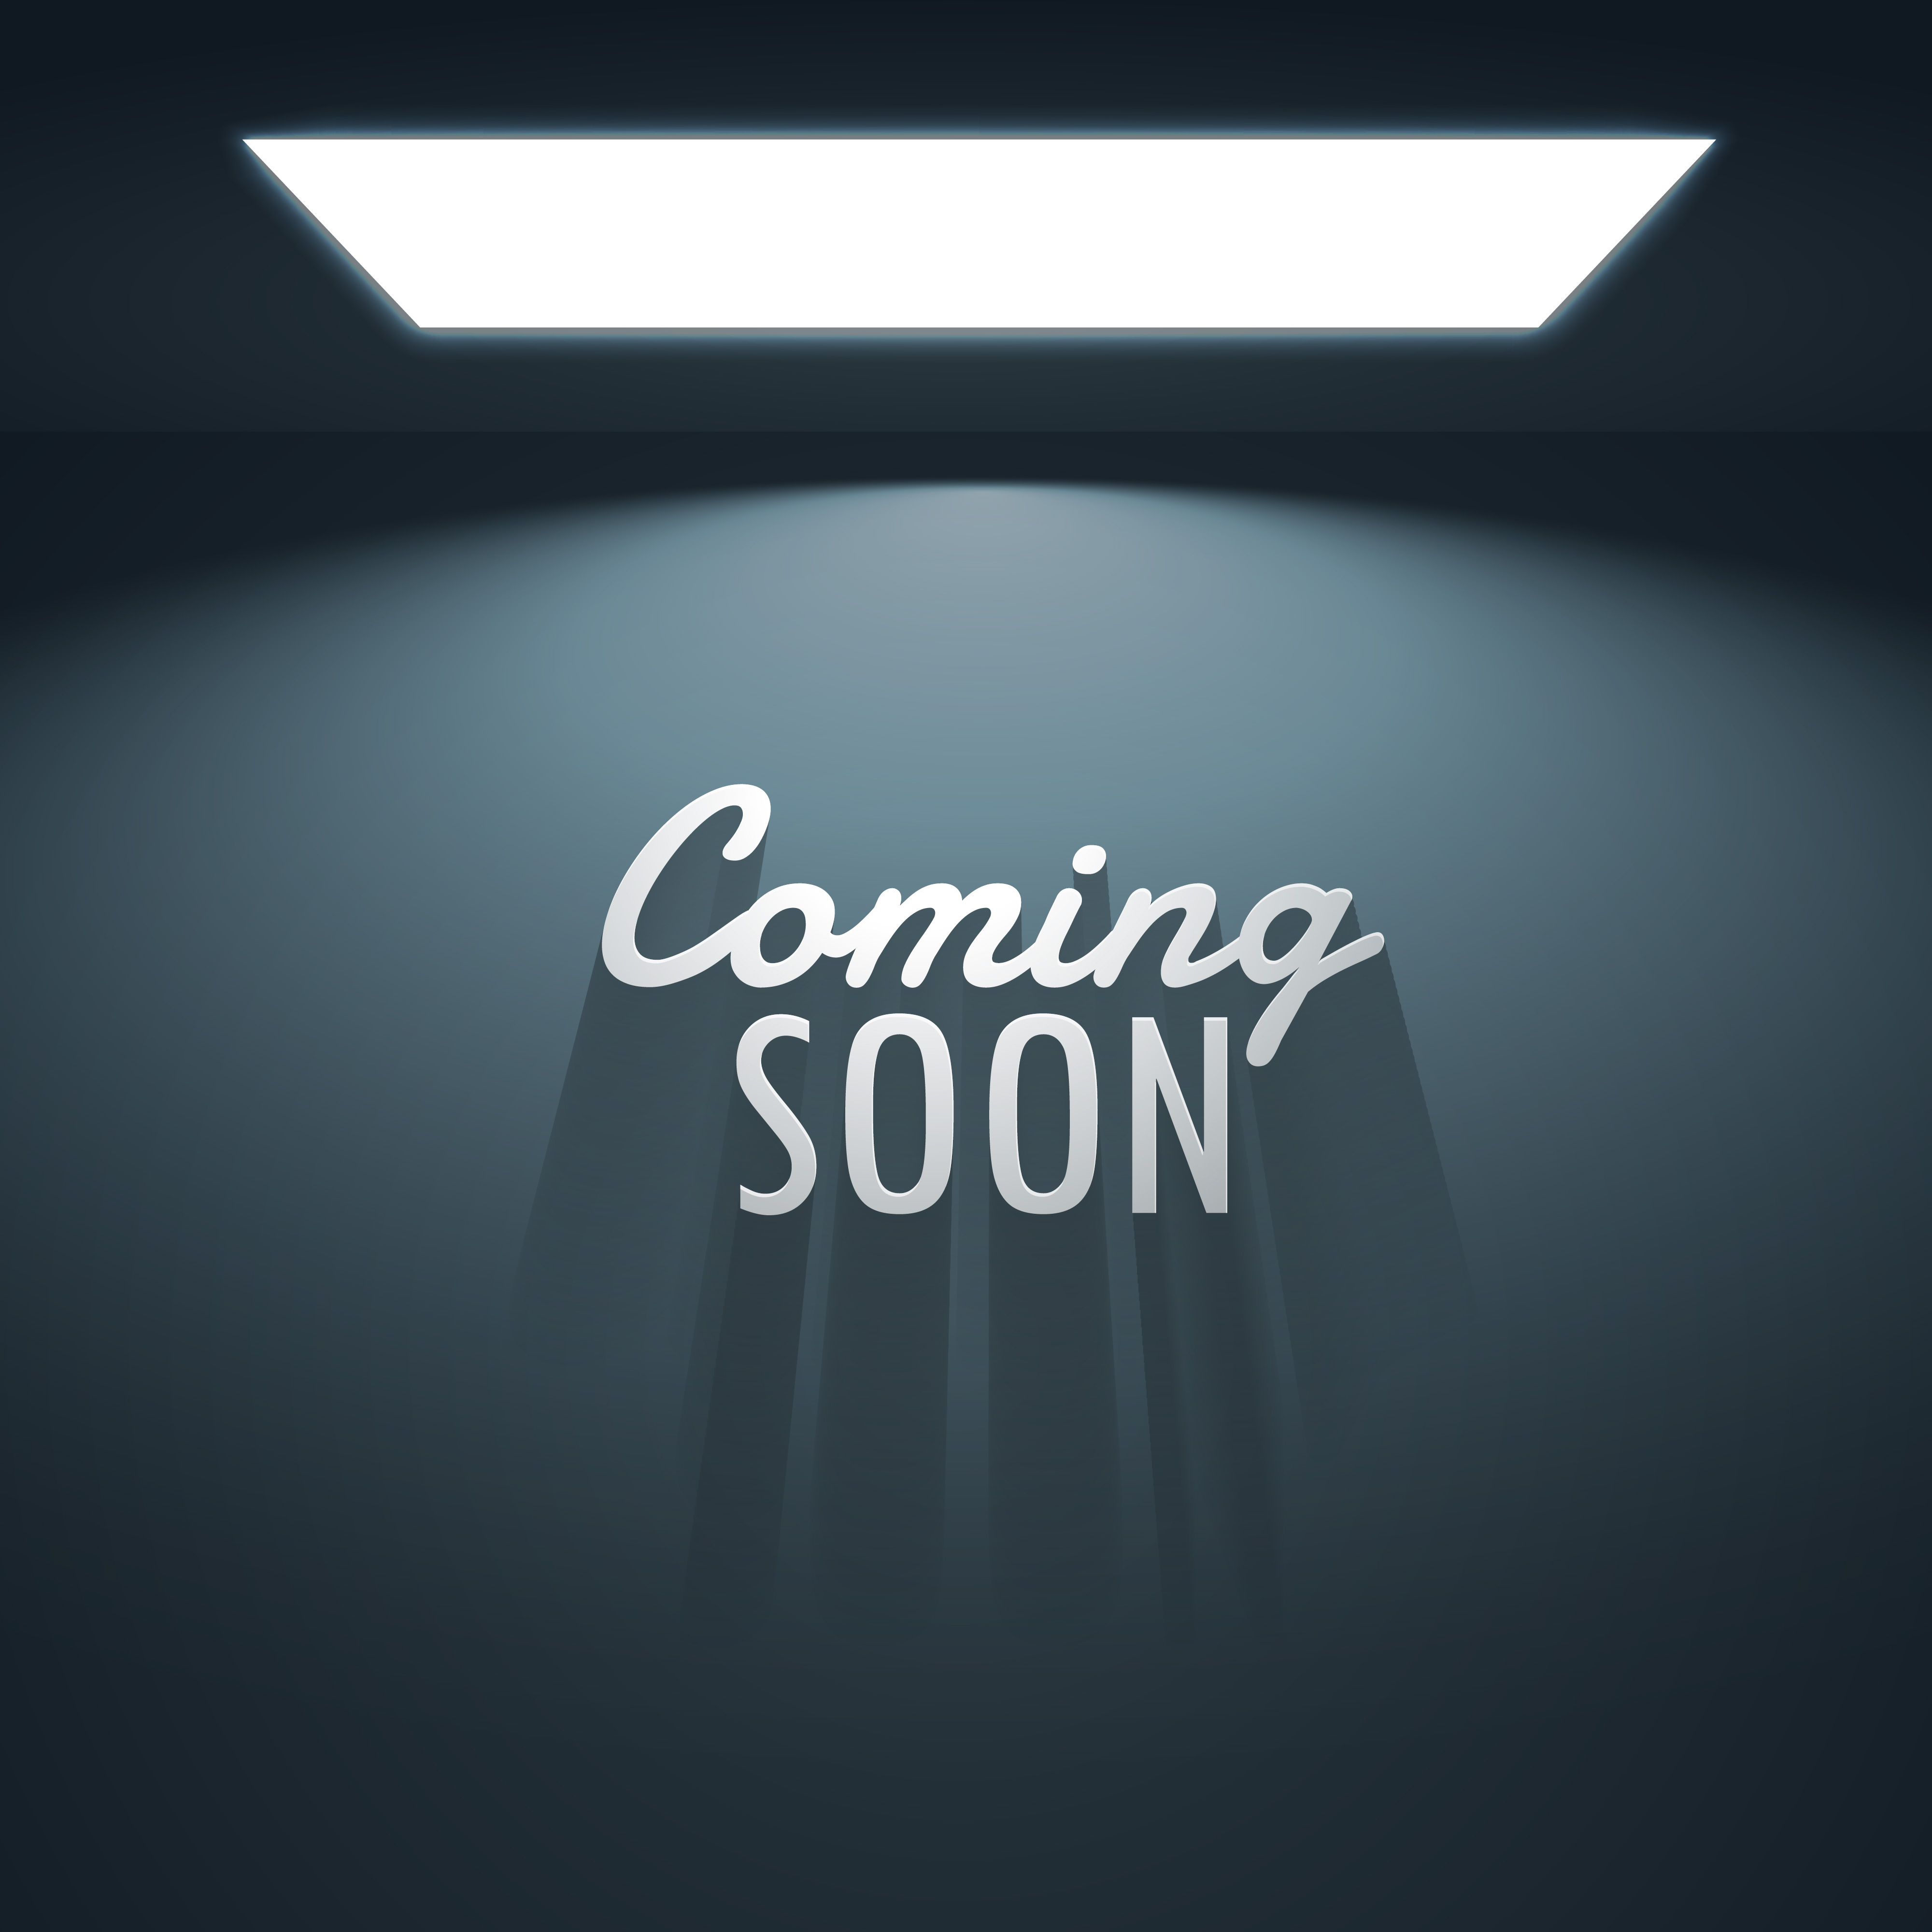 Coming Soon Image provided for free by Vectors via www.vecteezy.com (https://www.vecteezy.com)